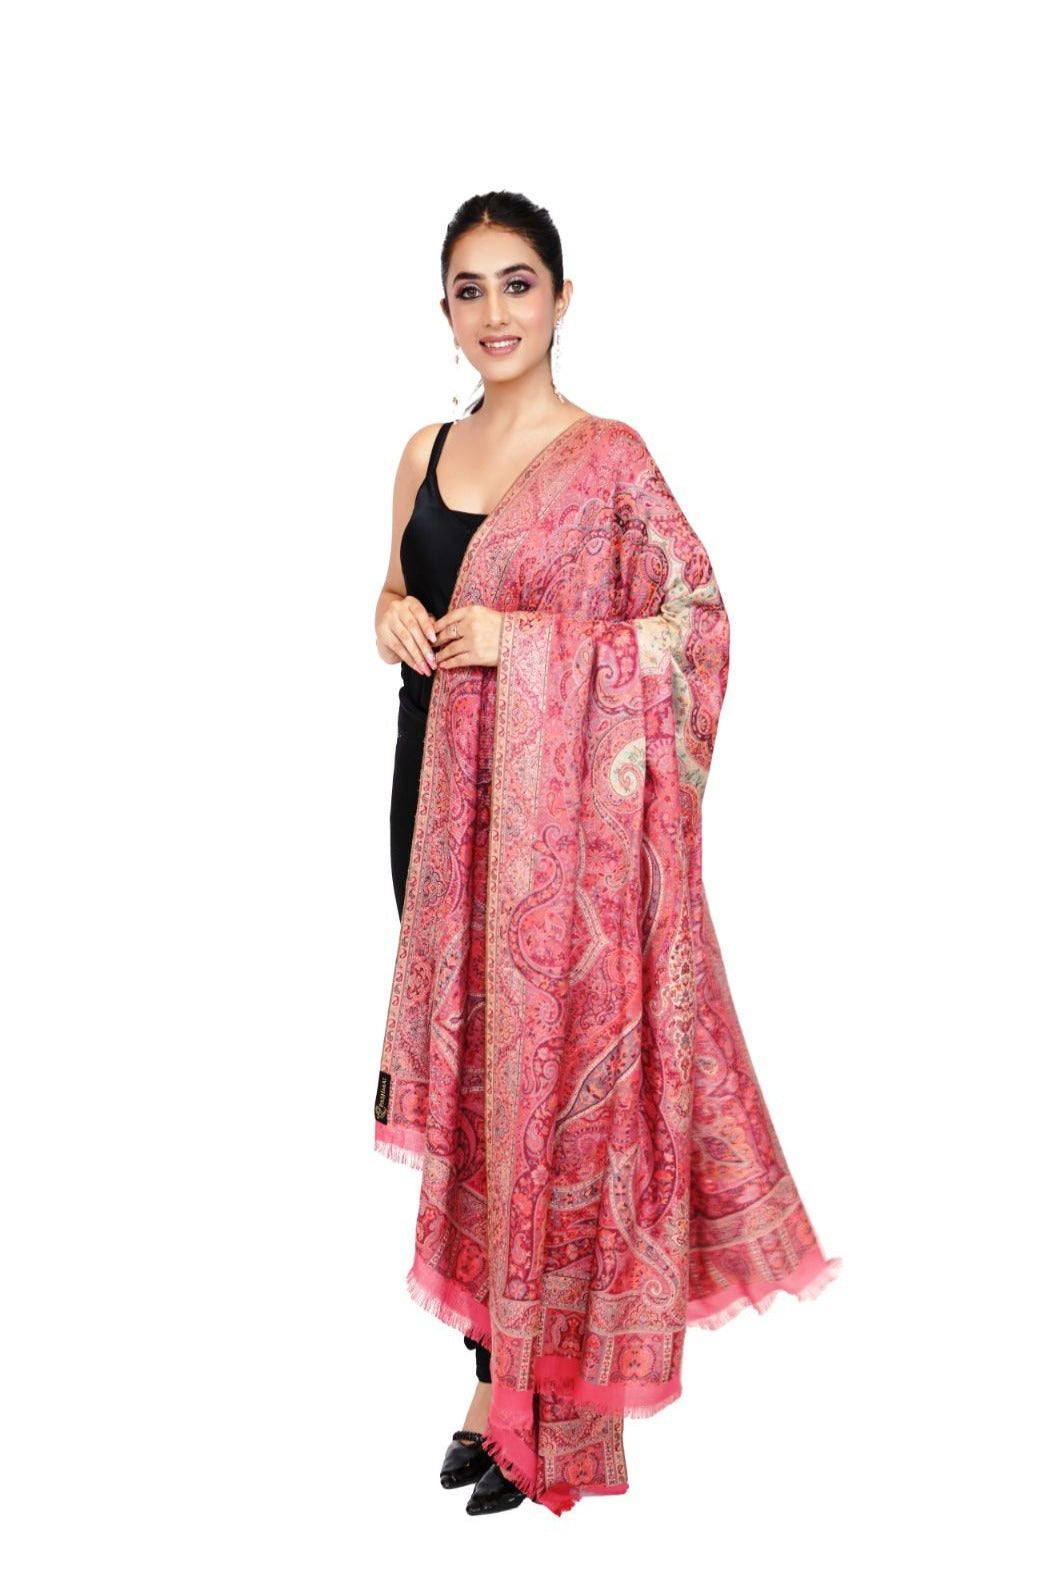 Traditional Bamboo Modal Red Kani Shawl for Women